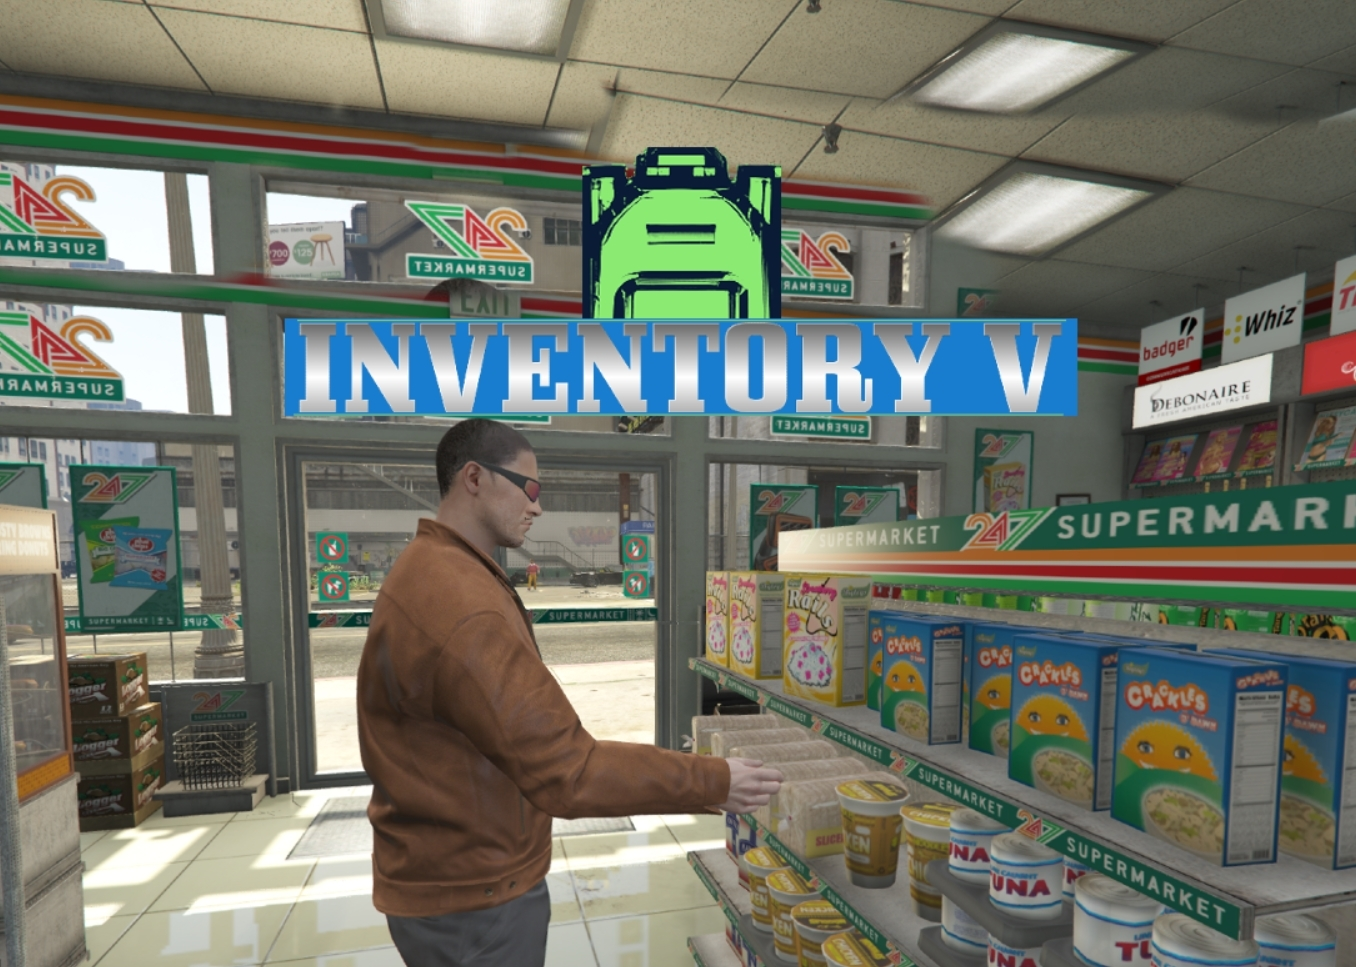 How to Access Your Inventory in GTA 5: 3 Steps (with Pictures)